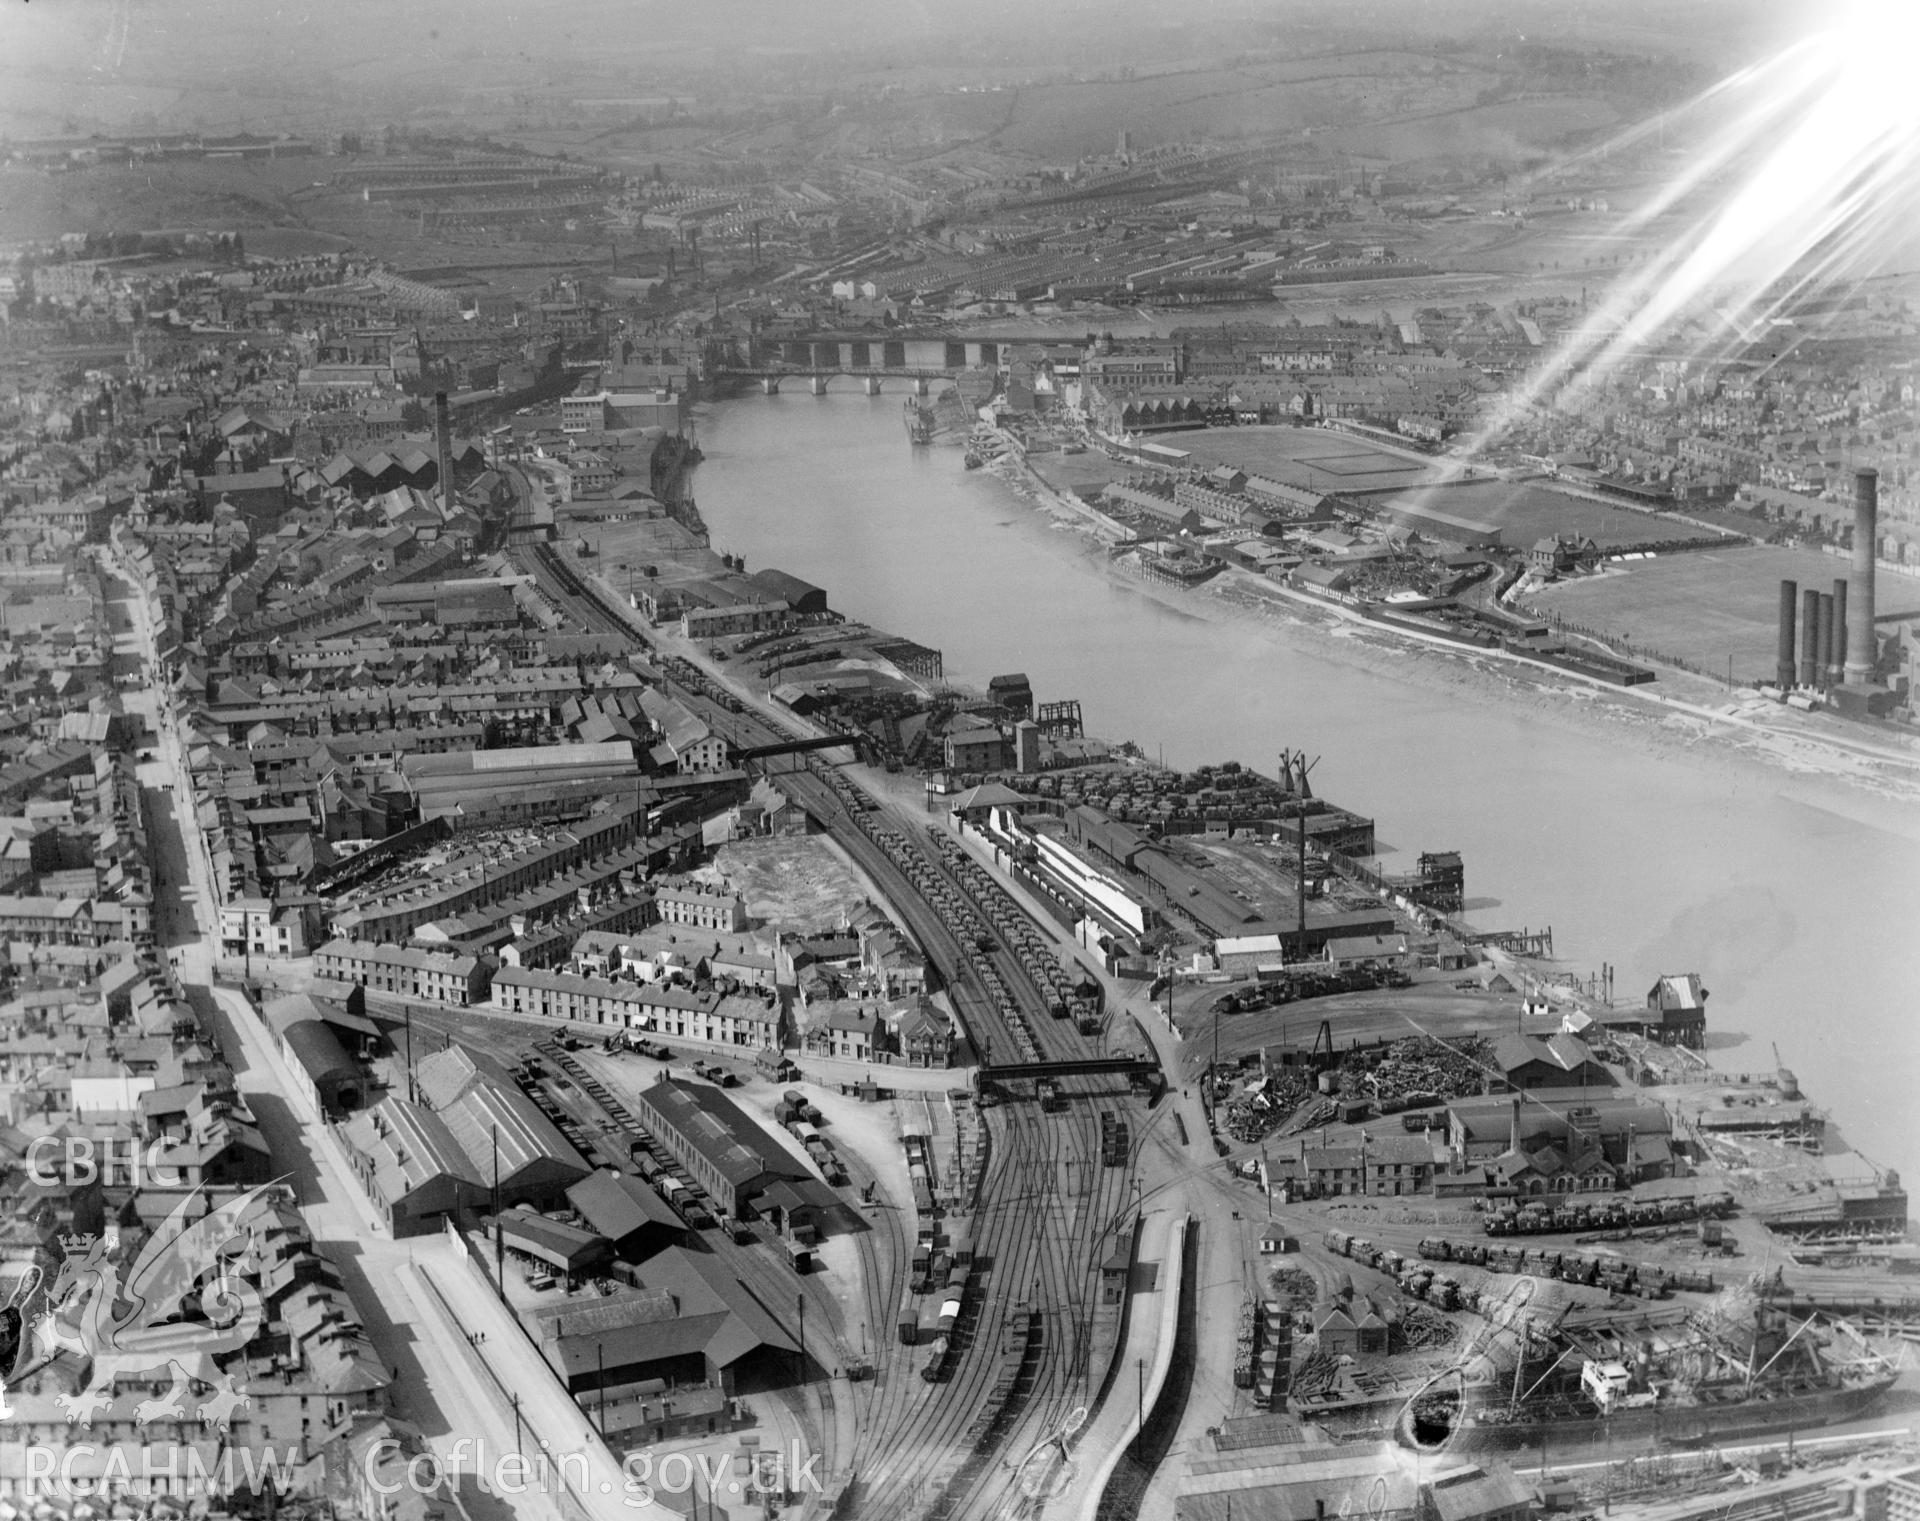 View of Newport showing Rodney Parade, rail and road bridges, and dry dock, oblique aerial view. 5?x4? black and white glass plate negative.